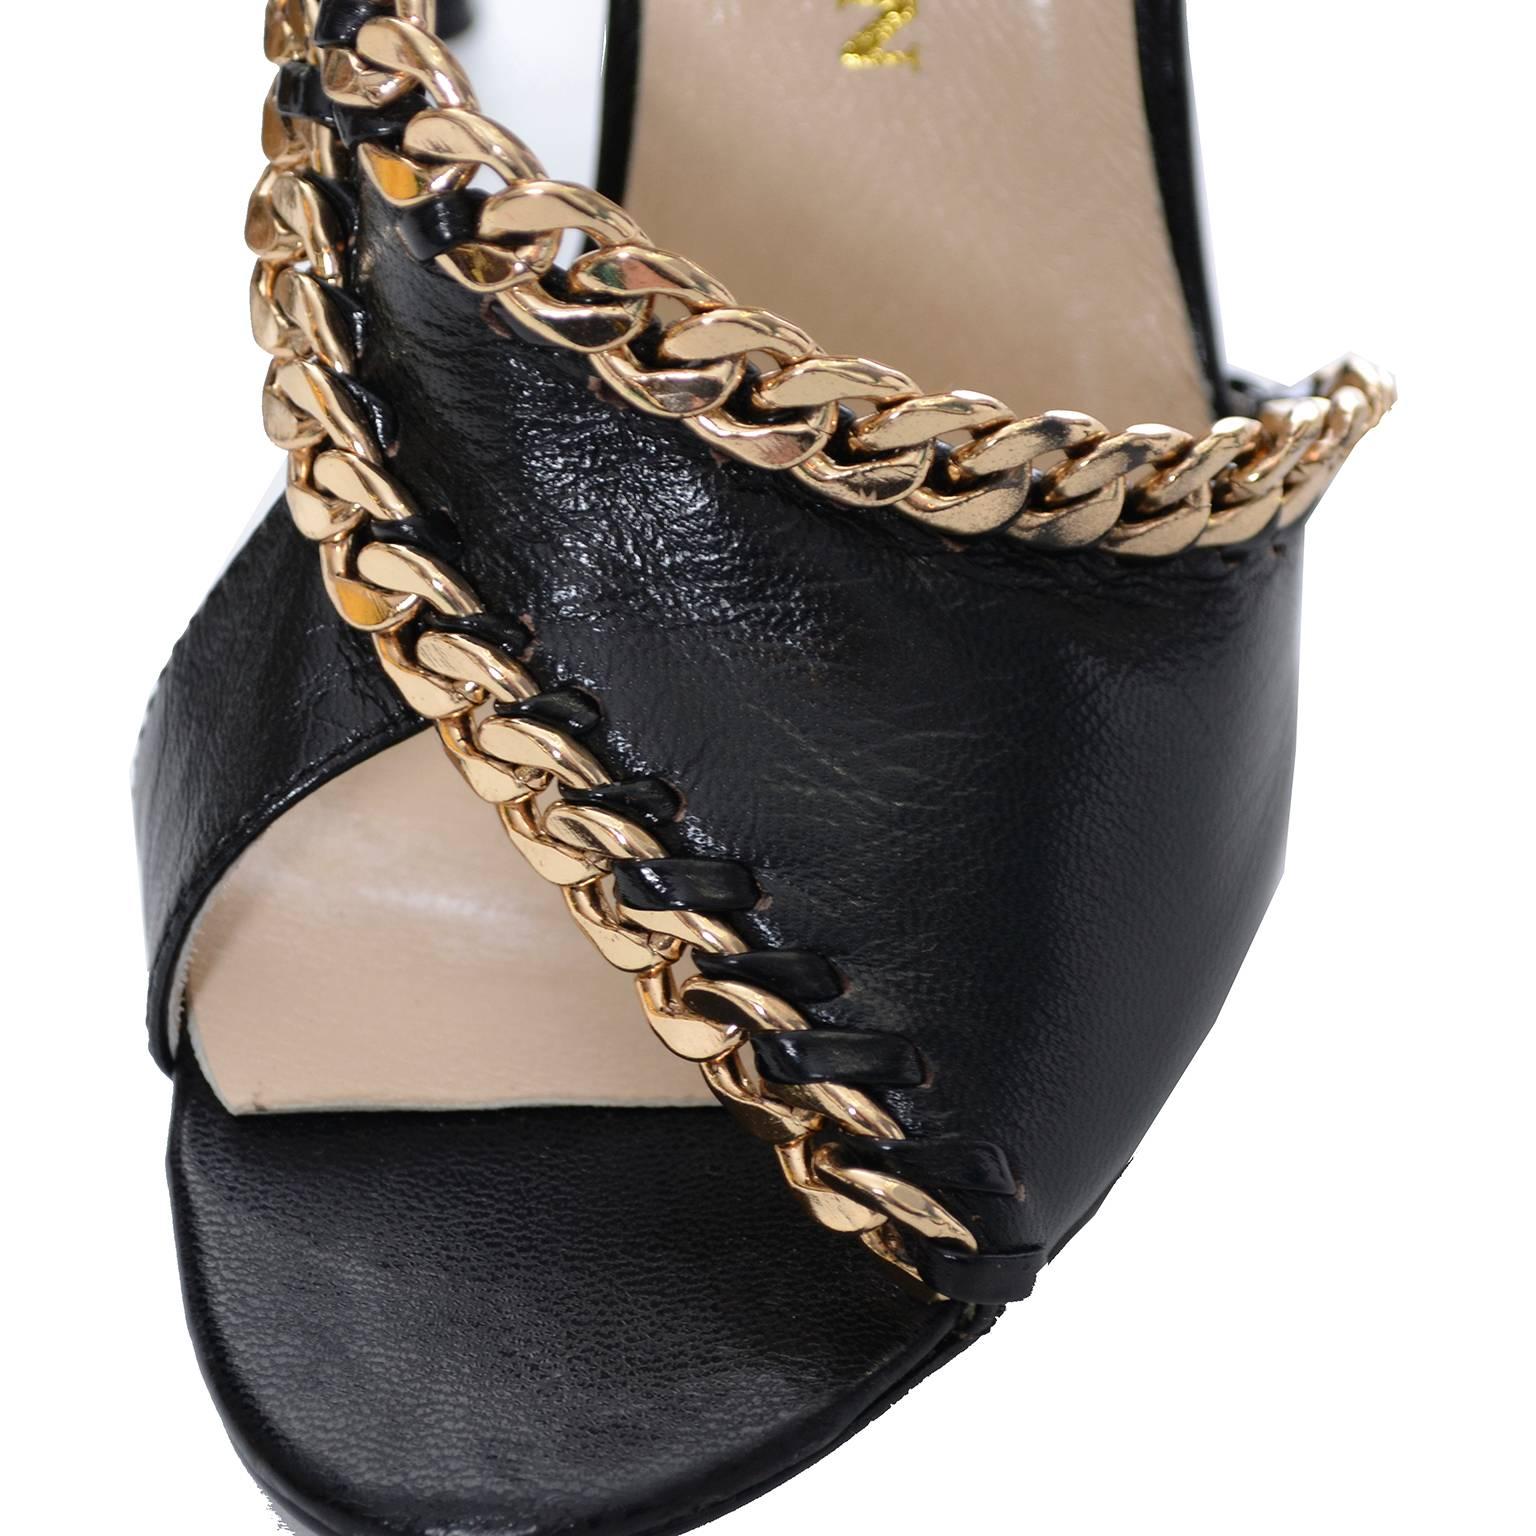 Black leather Balmain shoes with fabulous chunky chain detail designed by Giuseppe Zanotti. These great shoes have 4 and 1/2 inch heels are somewhat narrow - measuring 2 and 7/8 inches on the outside at the widest part of the sole. The shoes appear